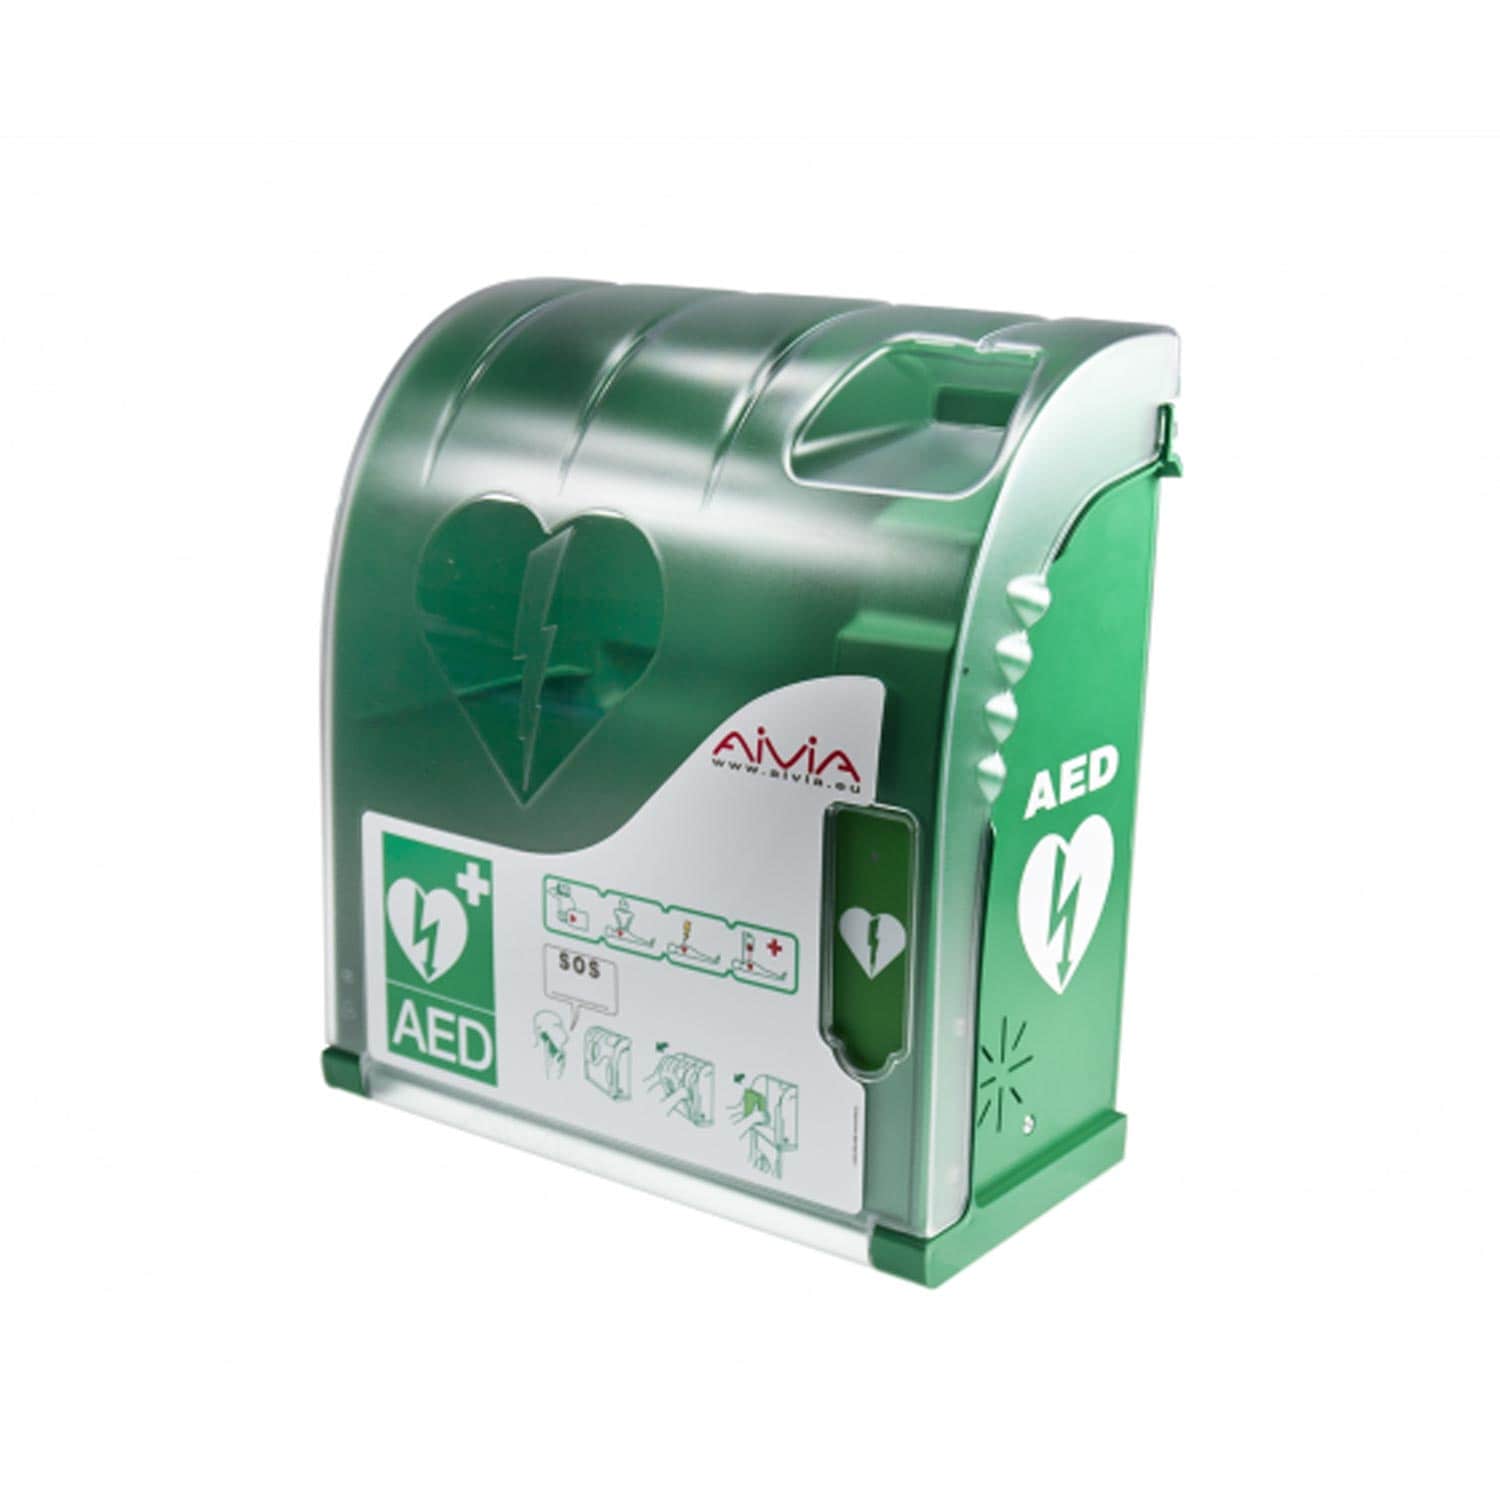 Aivia 100 Protective Cabinet For All Commercially Available Defibrillators